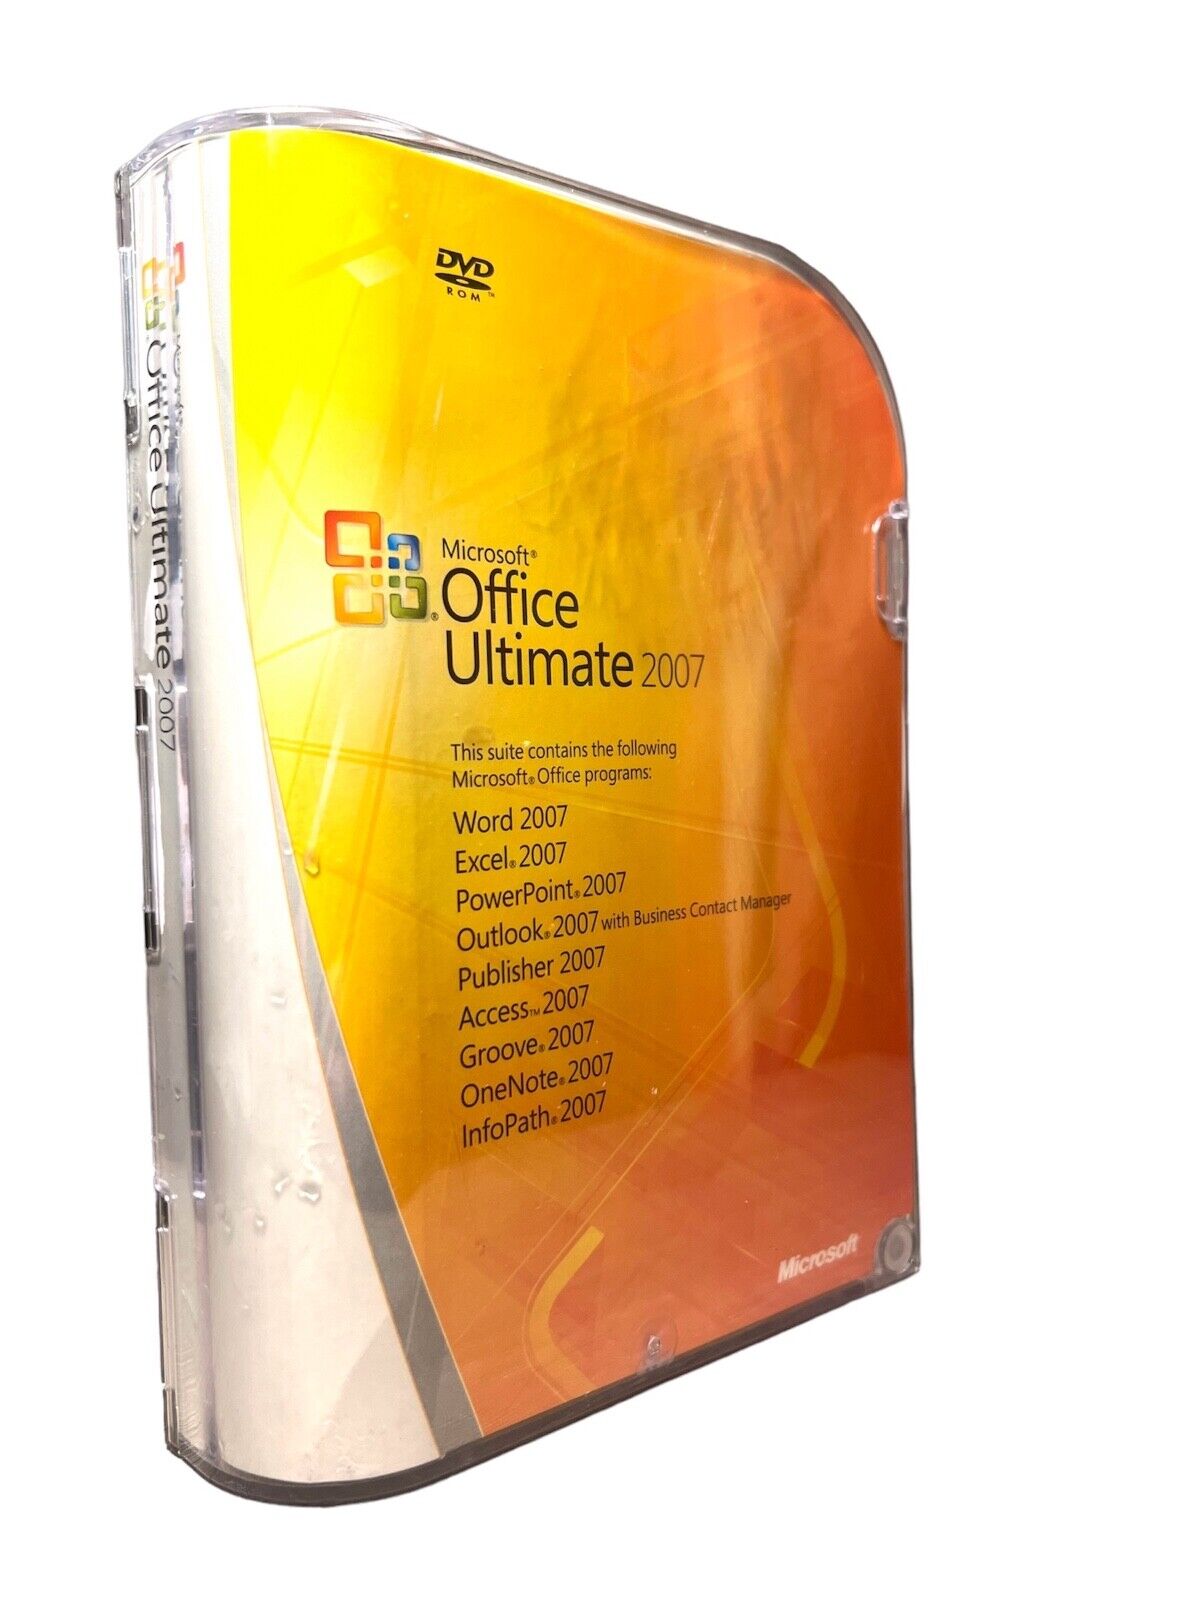 Microsoft Office 2007 Ultimate Full English Retail Version DVD 2 Discs With Key